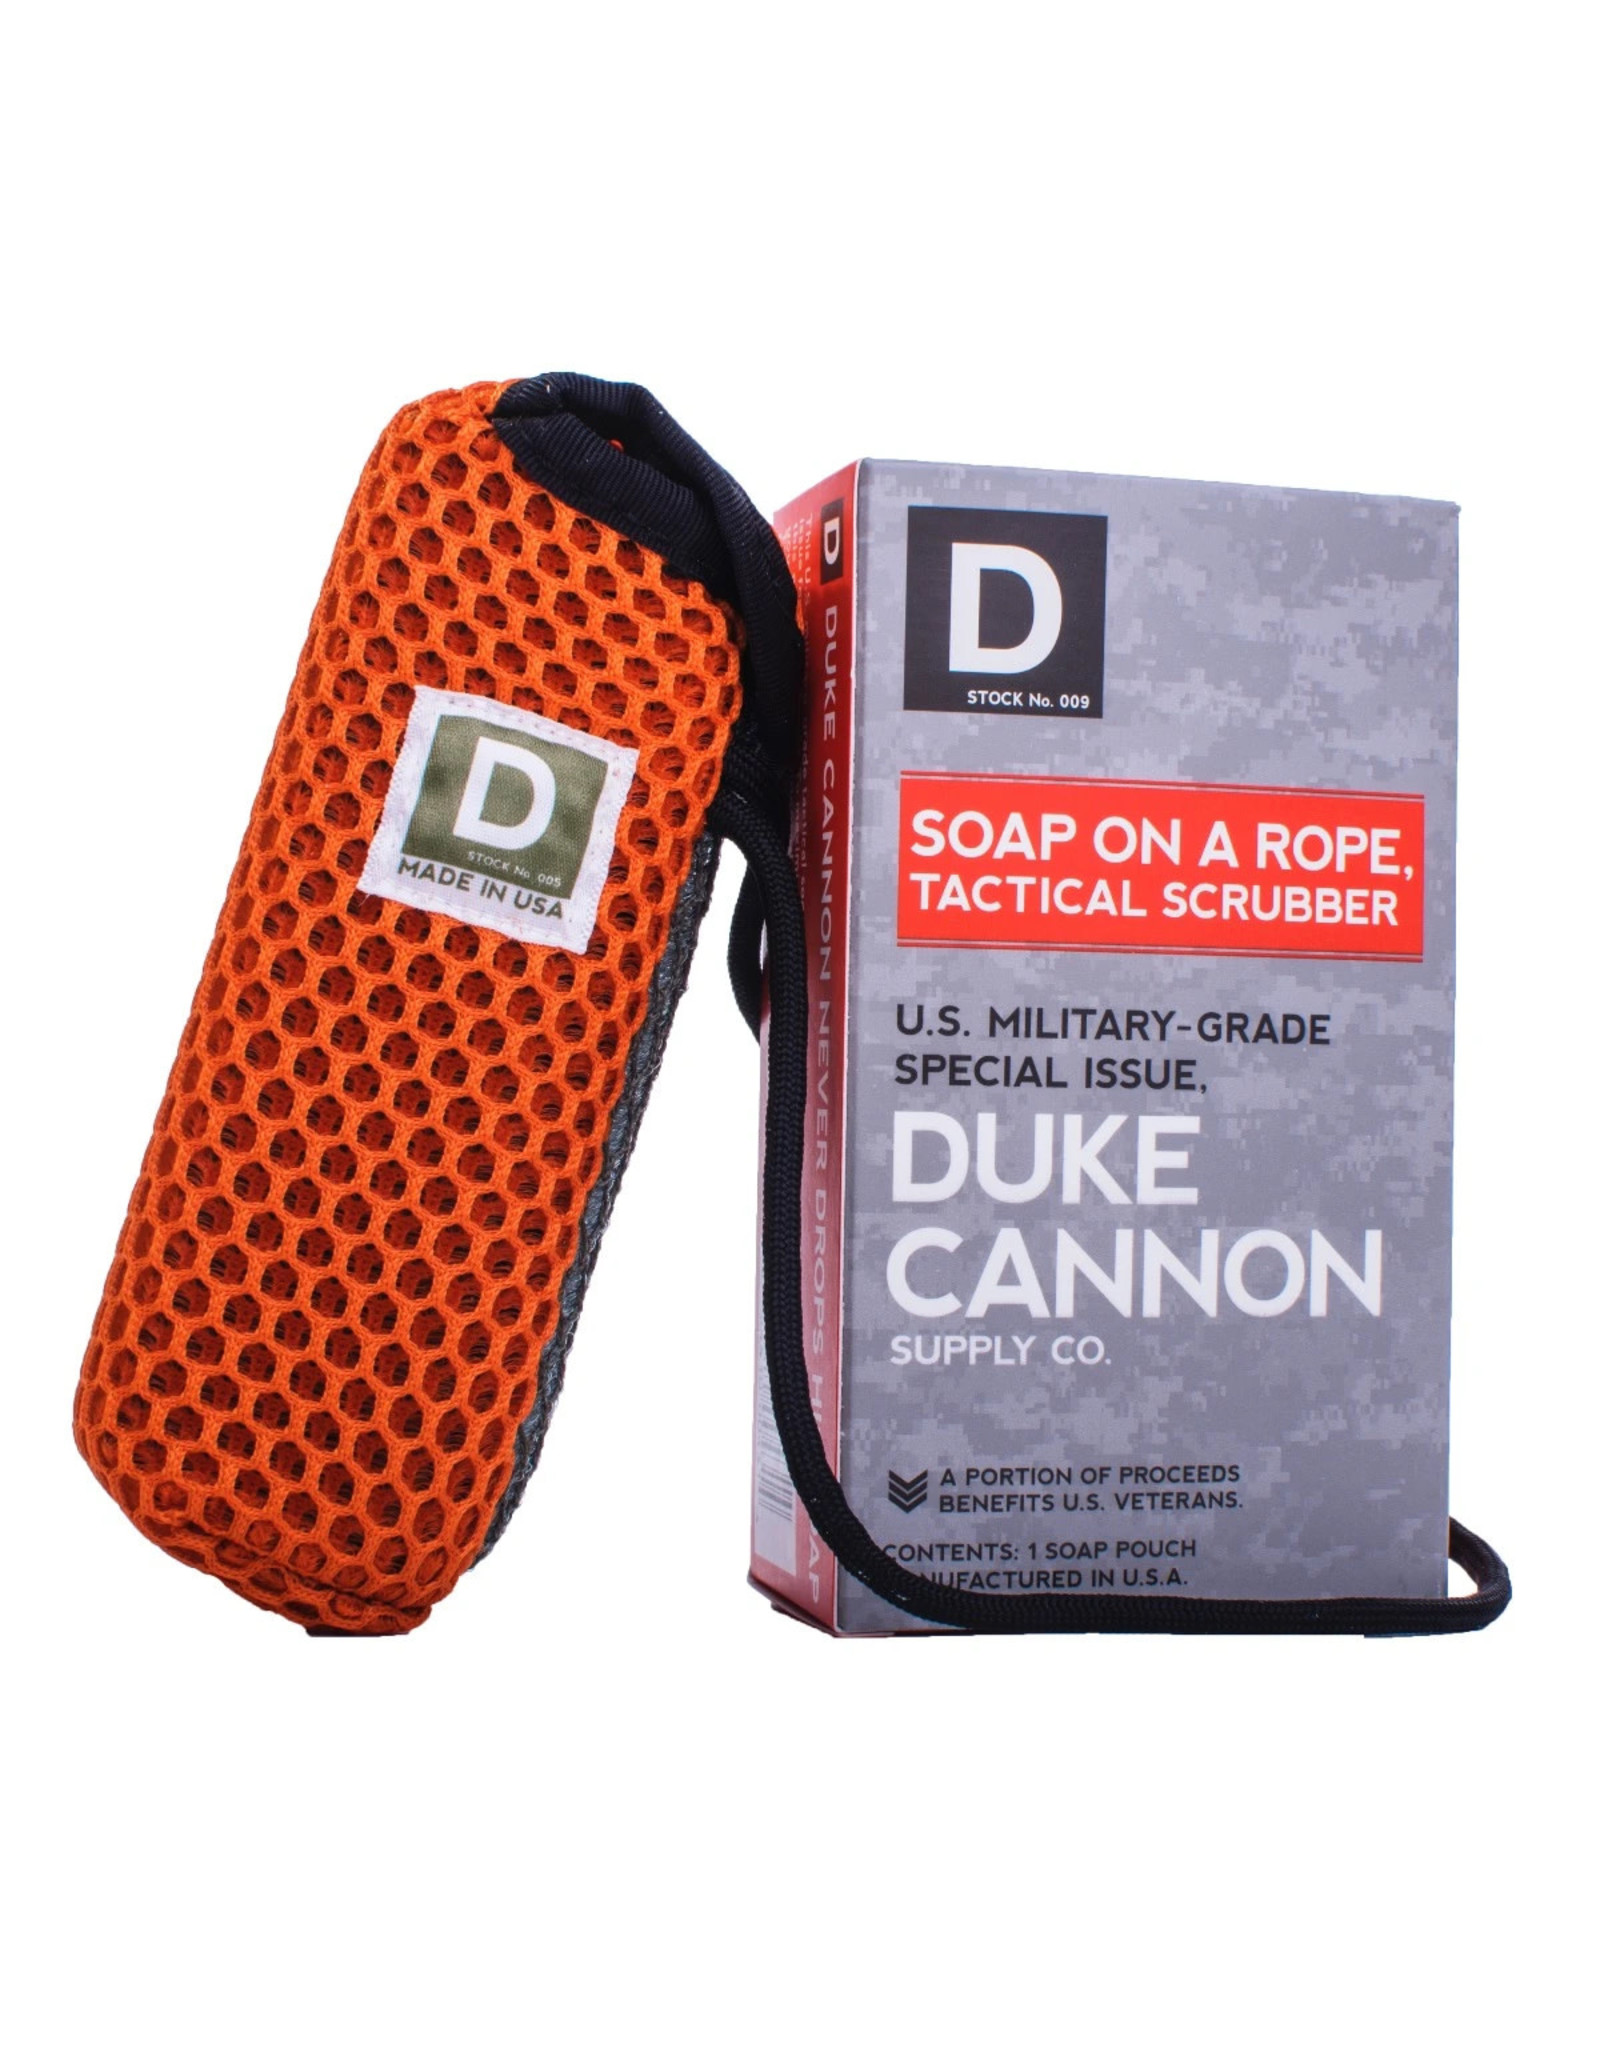 Duke Cannon Supply Co. Soap on a Rope, Tactical